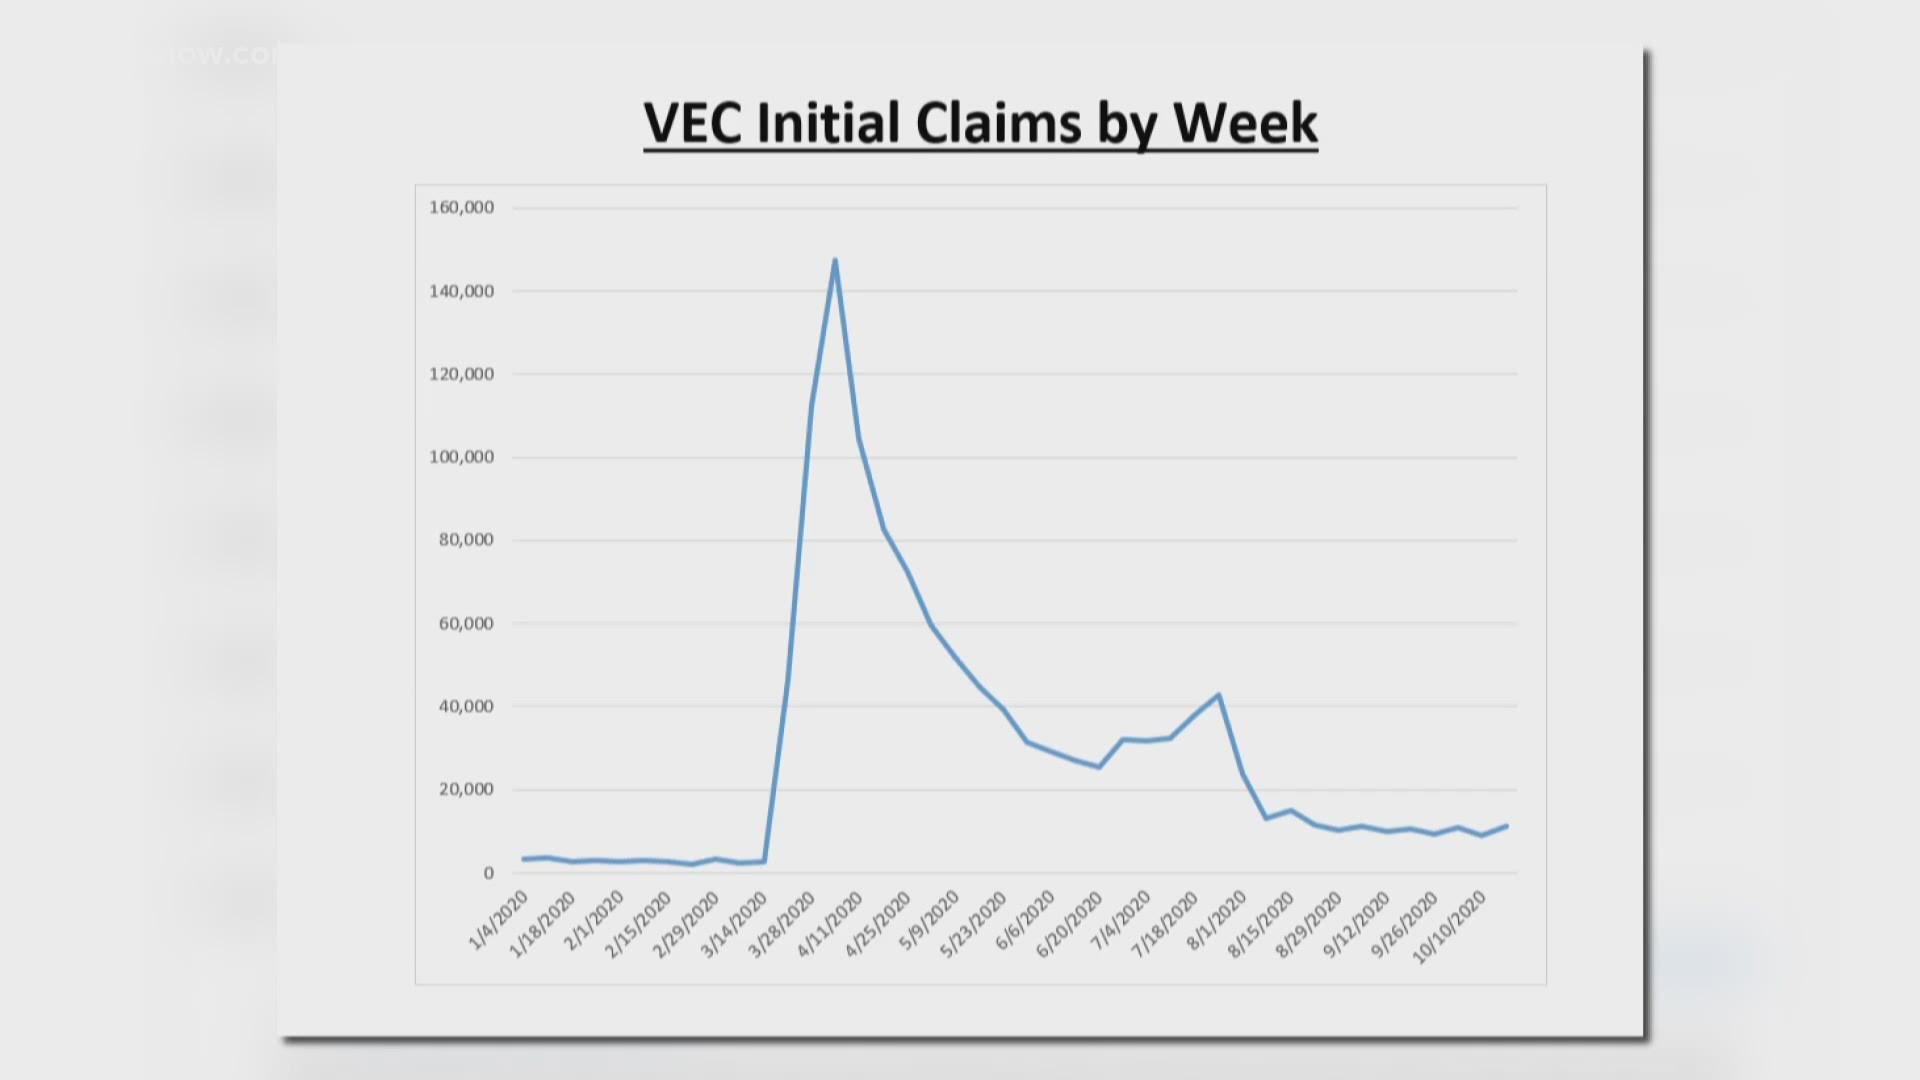 More than 70,000 Virginians are still waiting for their unemployment claims to be reviewed. VEC expects to start working on July reviews by the end of this week.